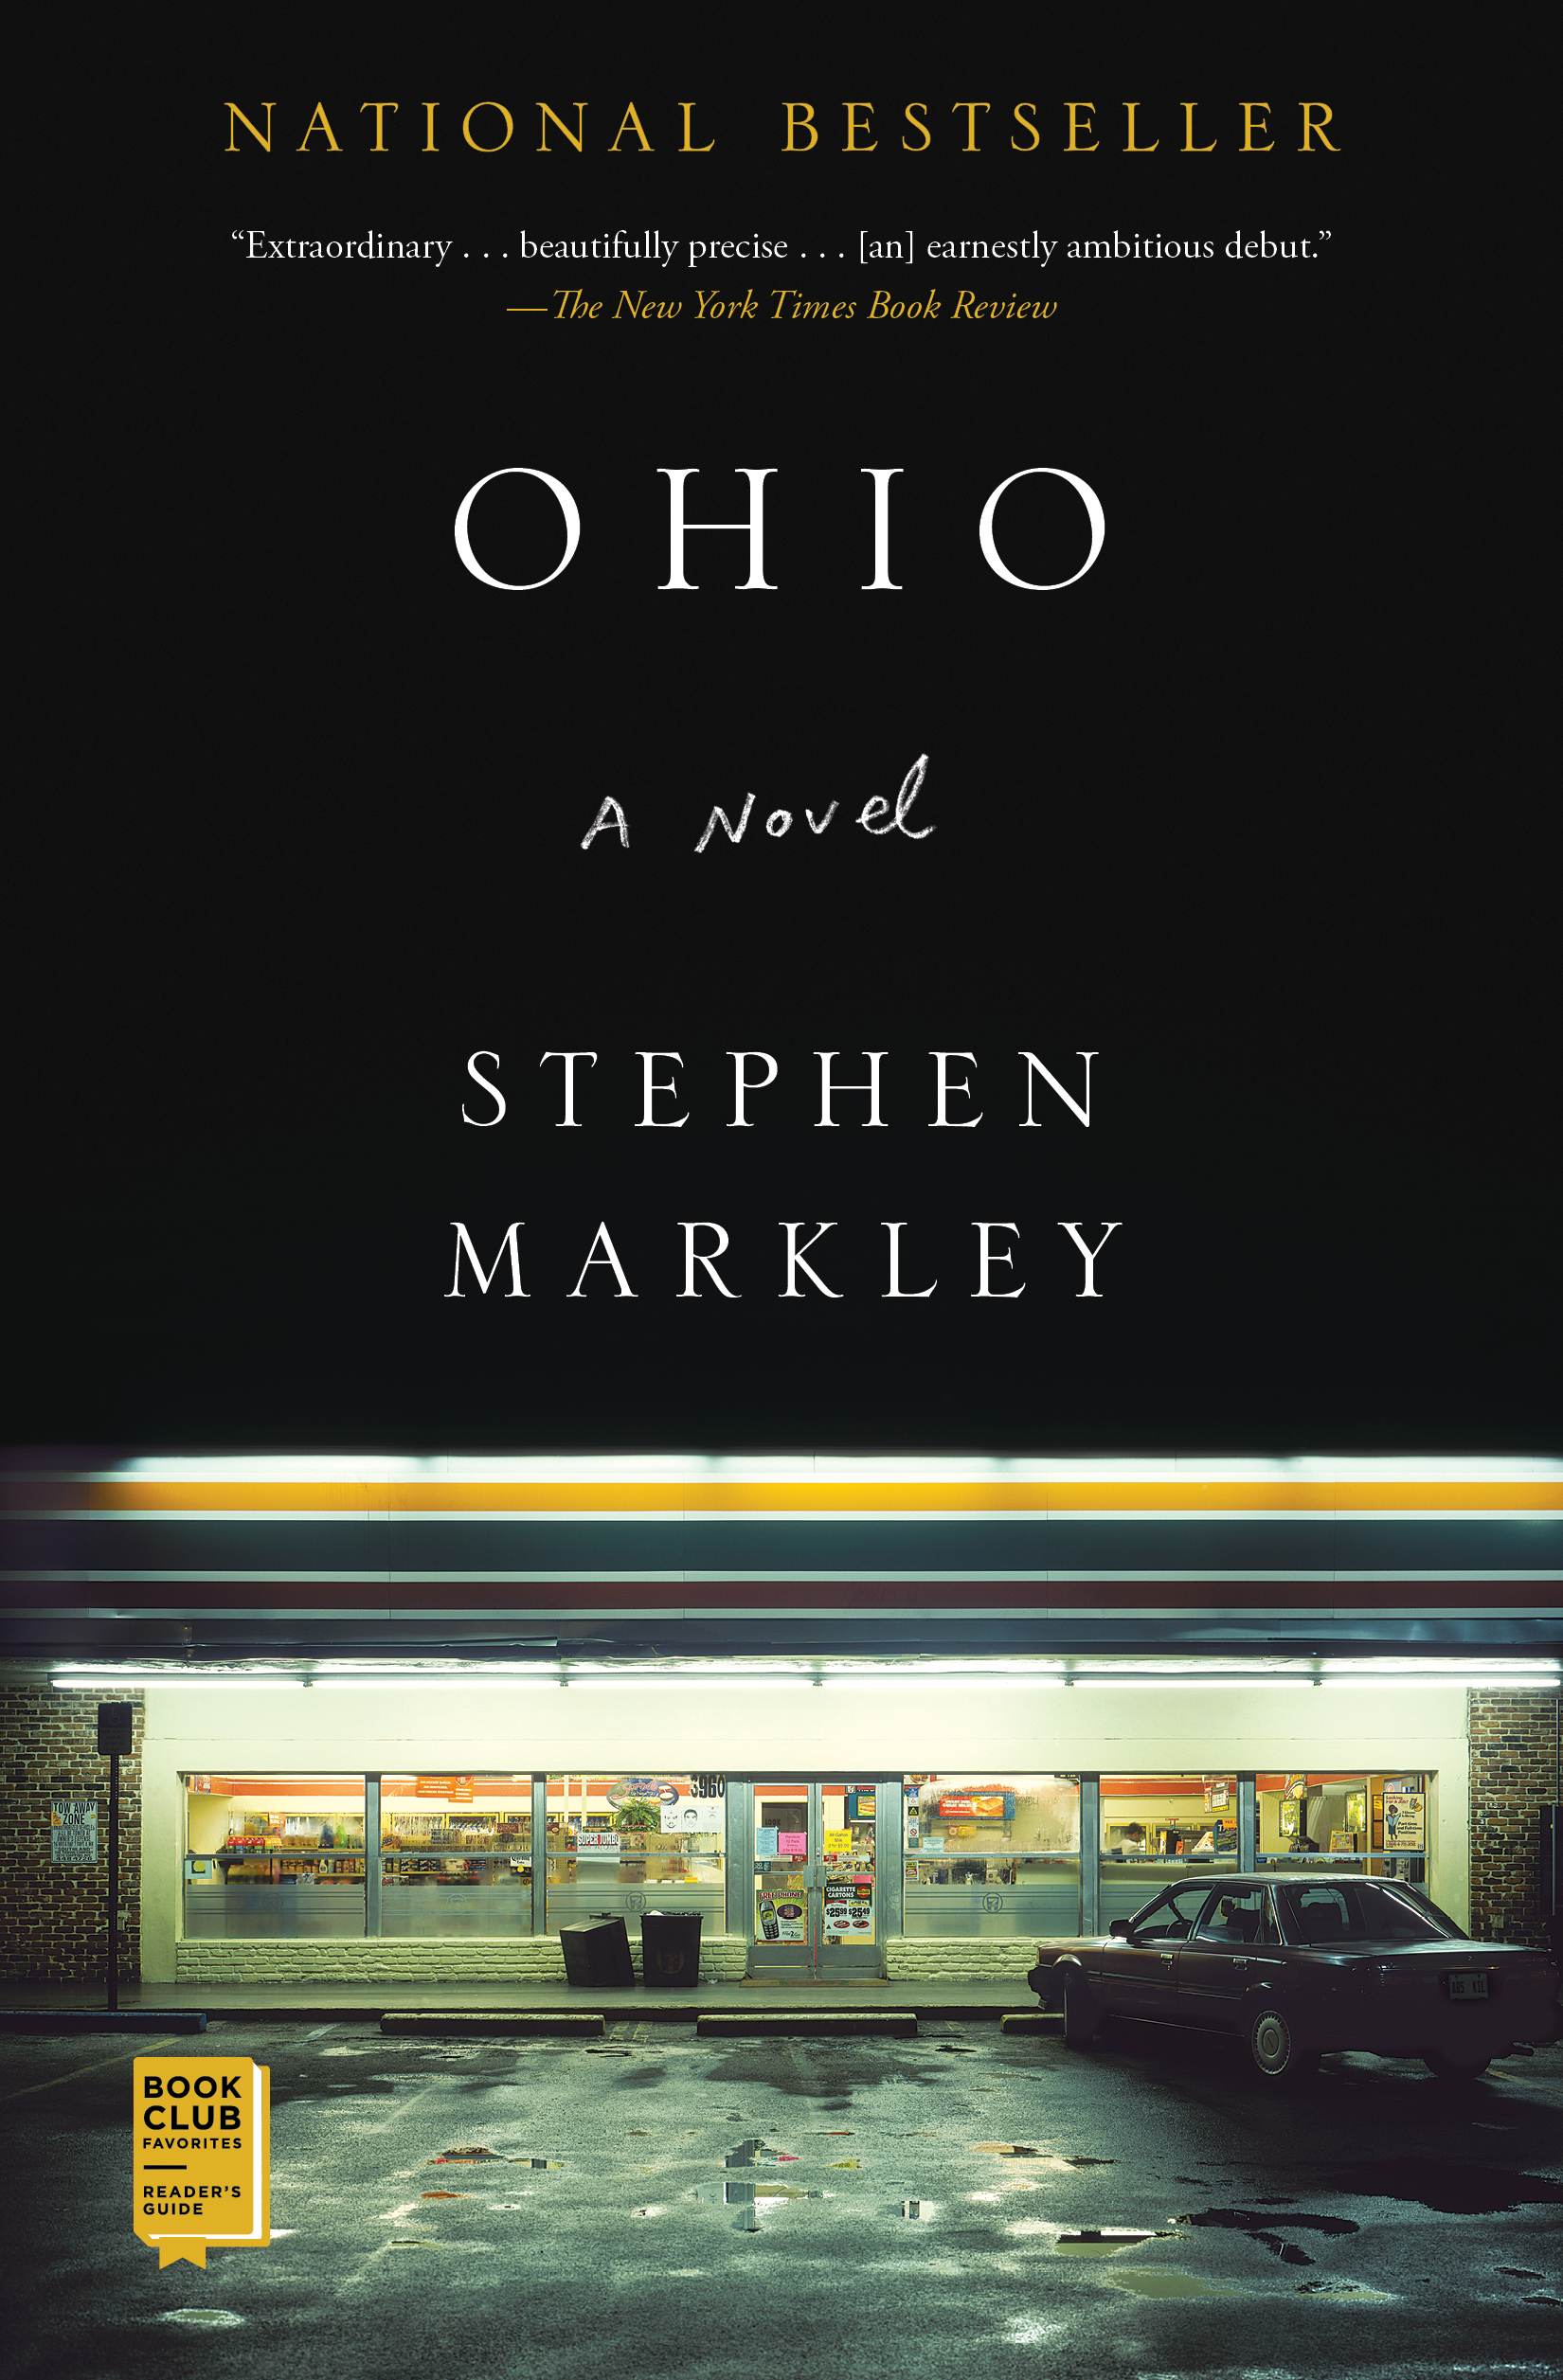 Image of book cover depicting a diner 